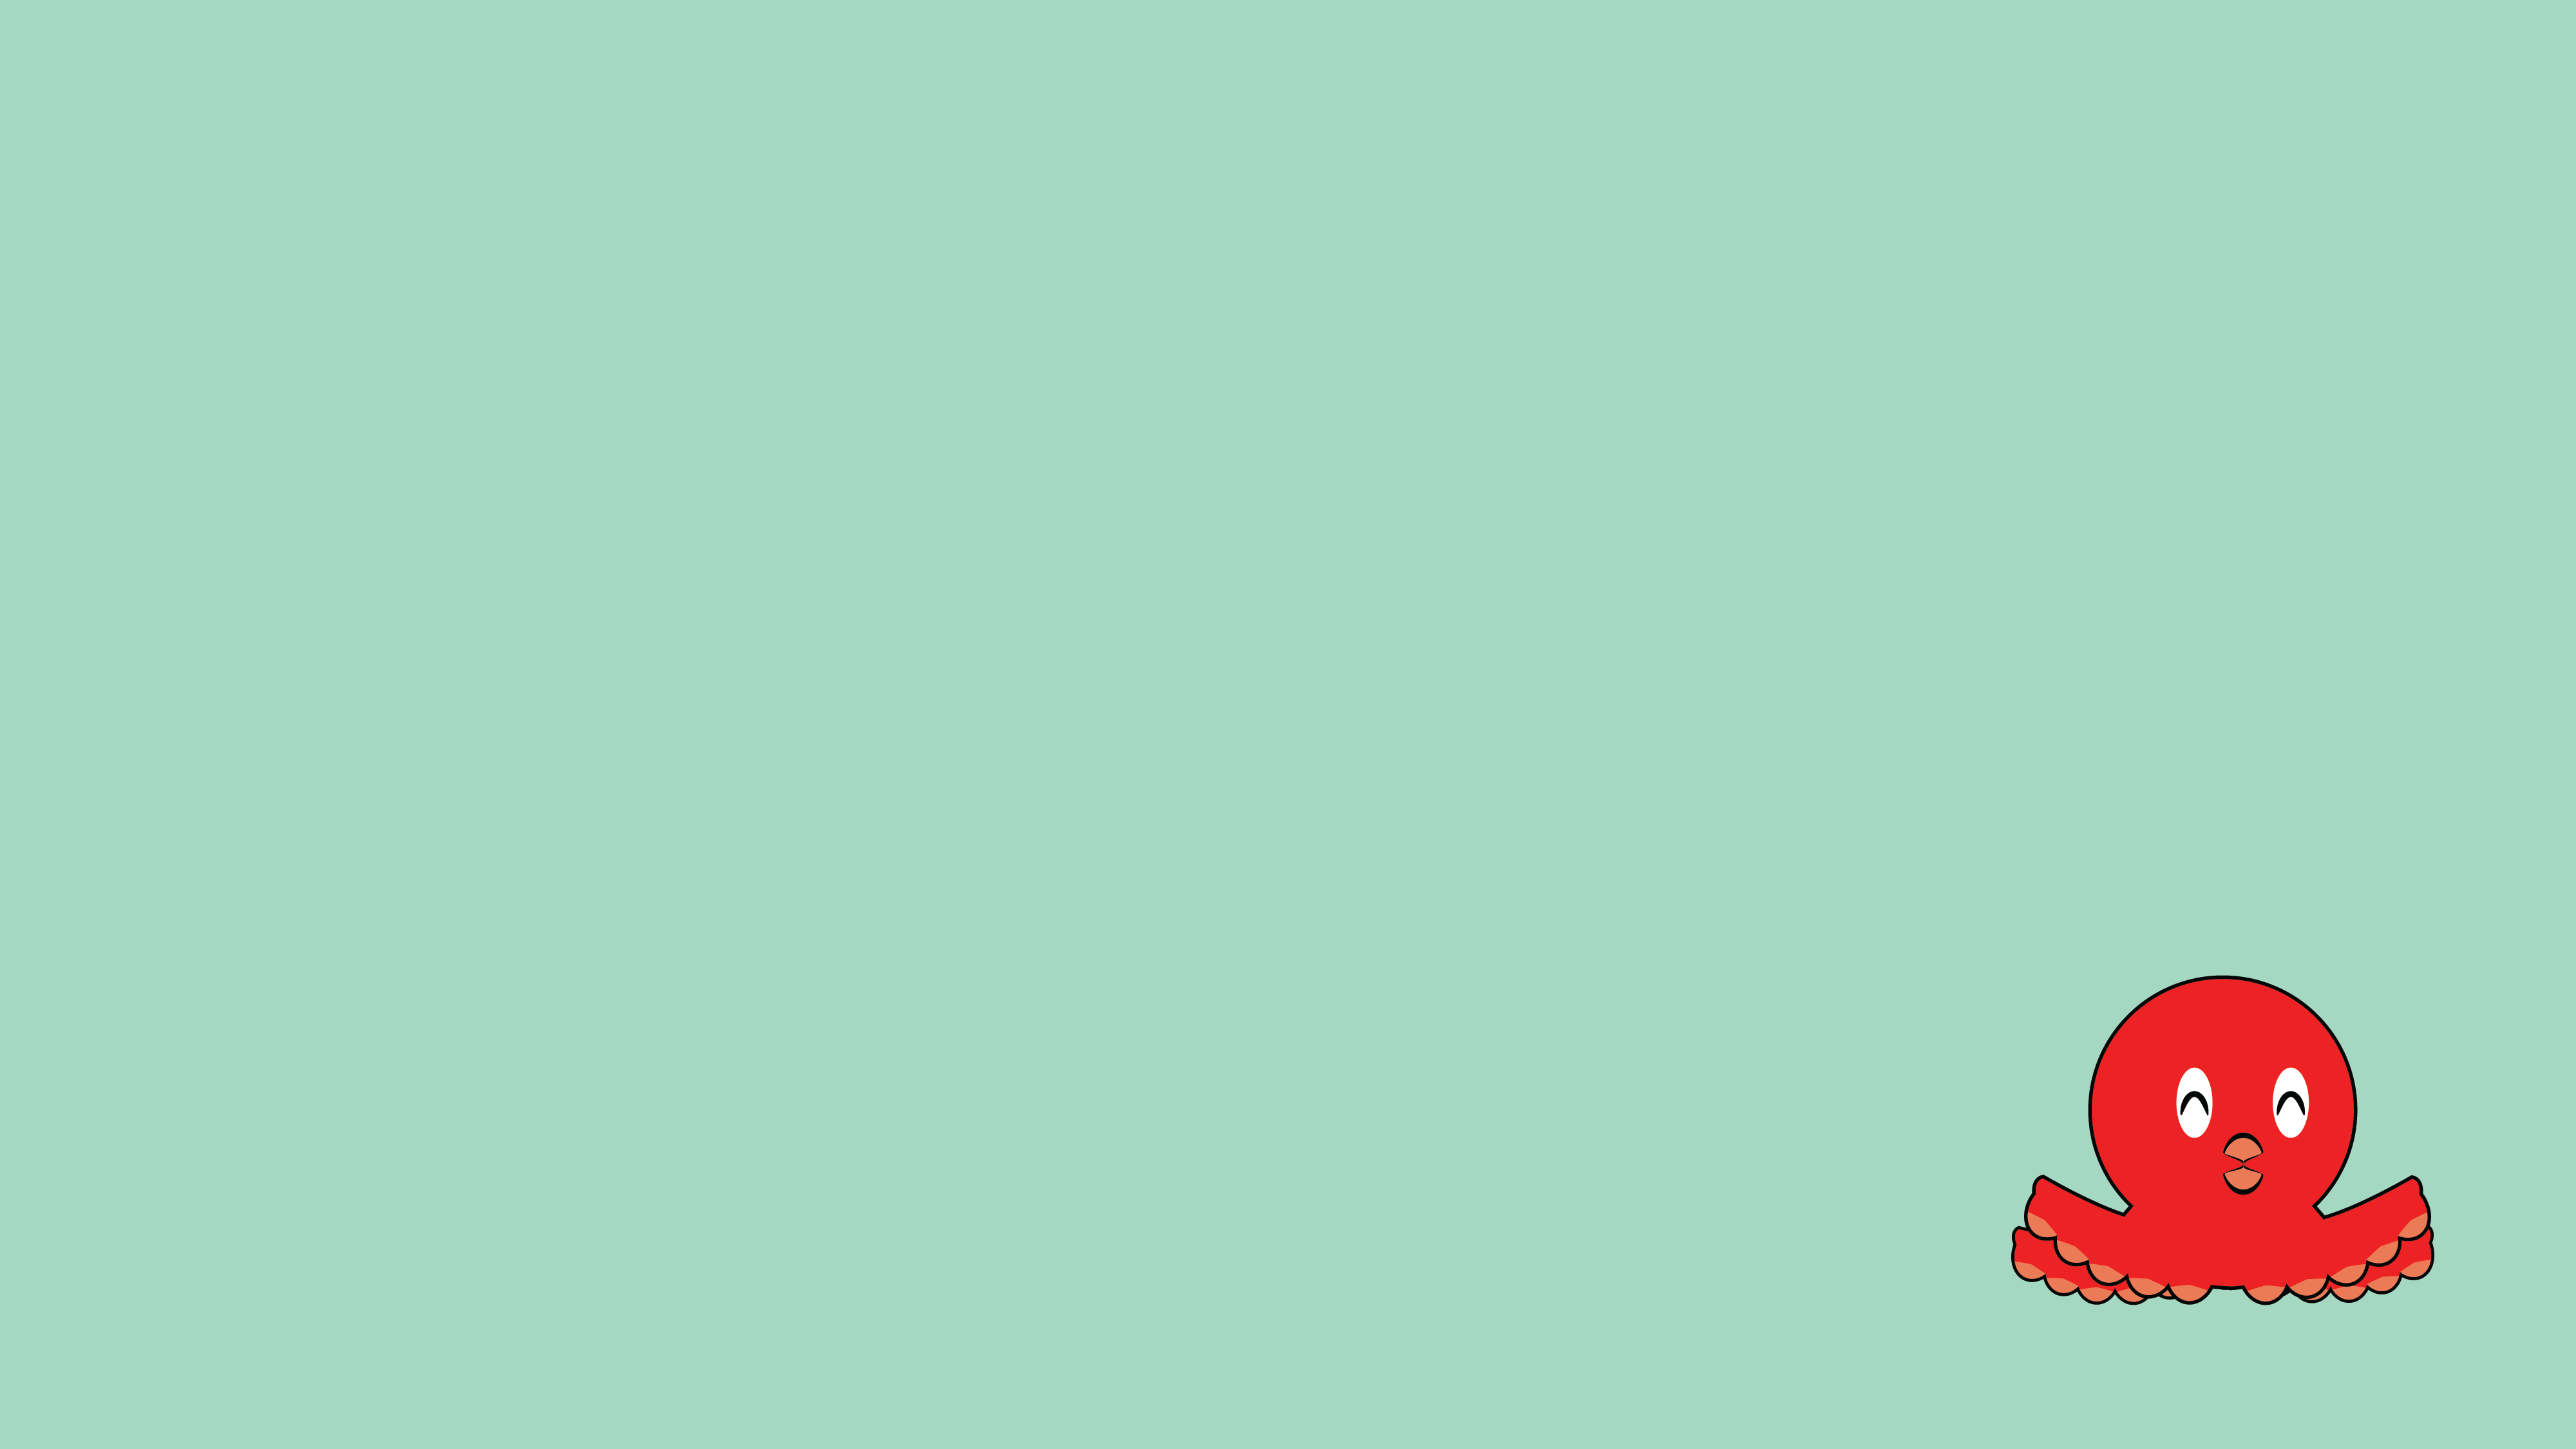 General 4000x2250 octopus teal red happy minimalism green green background